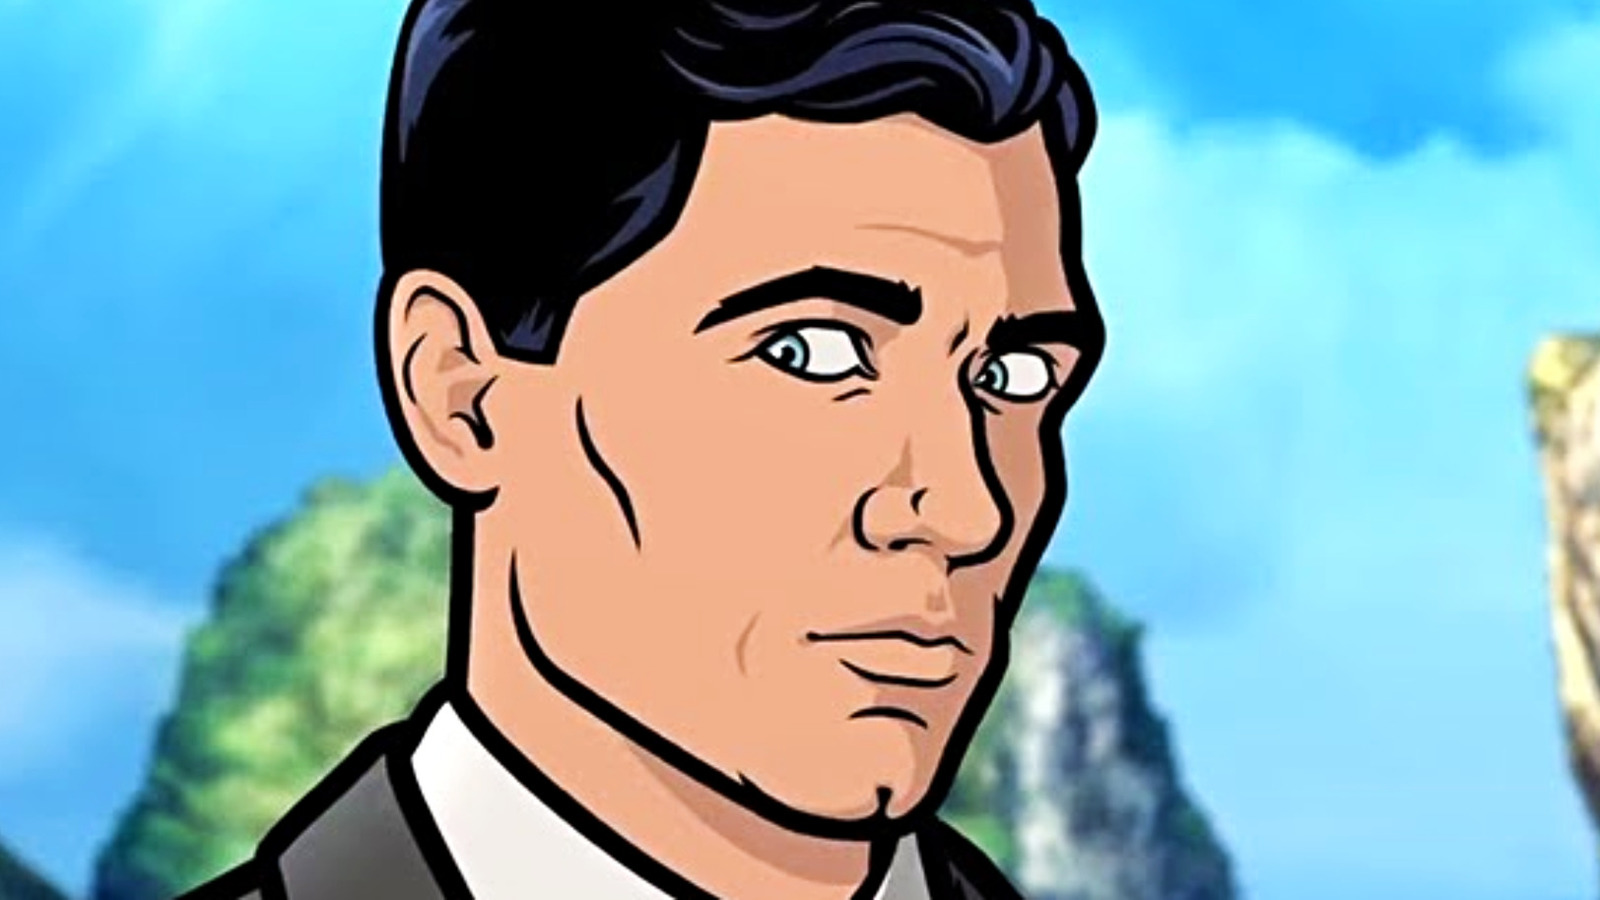 Archer Season 12 Release Date, Cast, And Plot - What We Know So Far